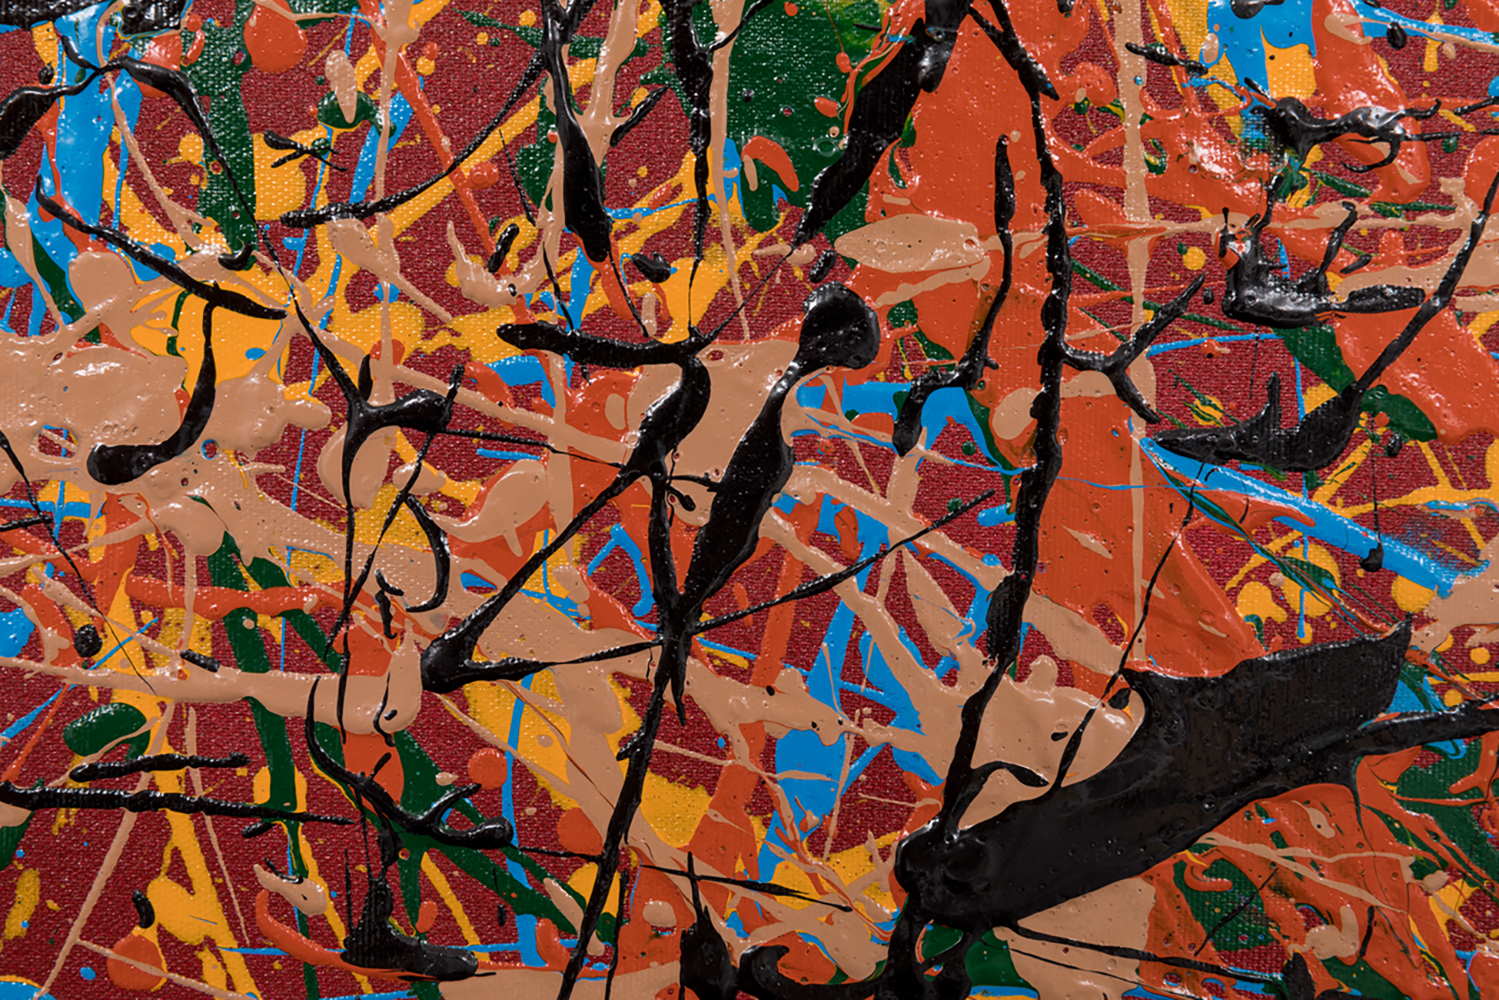 DAVID BRUSH (Madrid). "Pollock as pretext". Mixed media on canvas glued to board. Signed and dated - Image 3 of 6